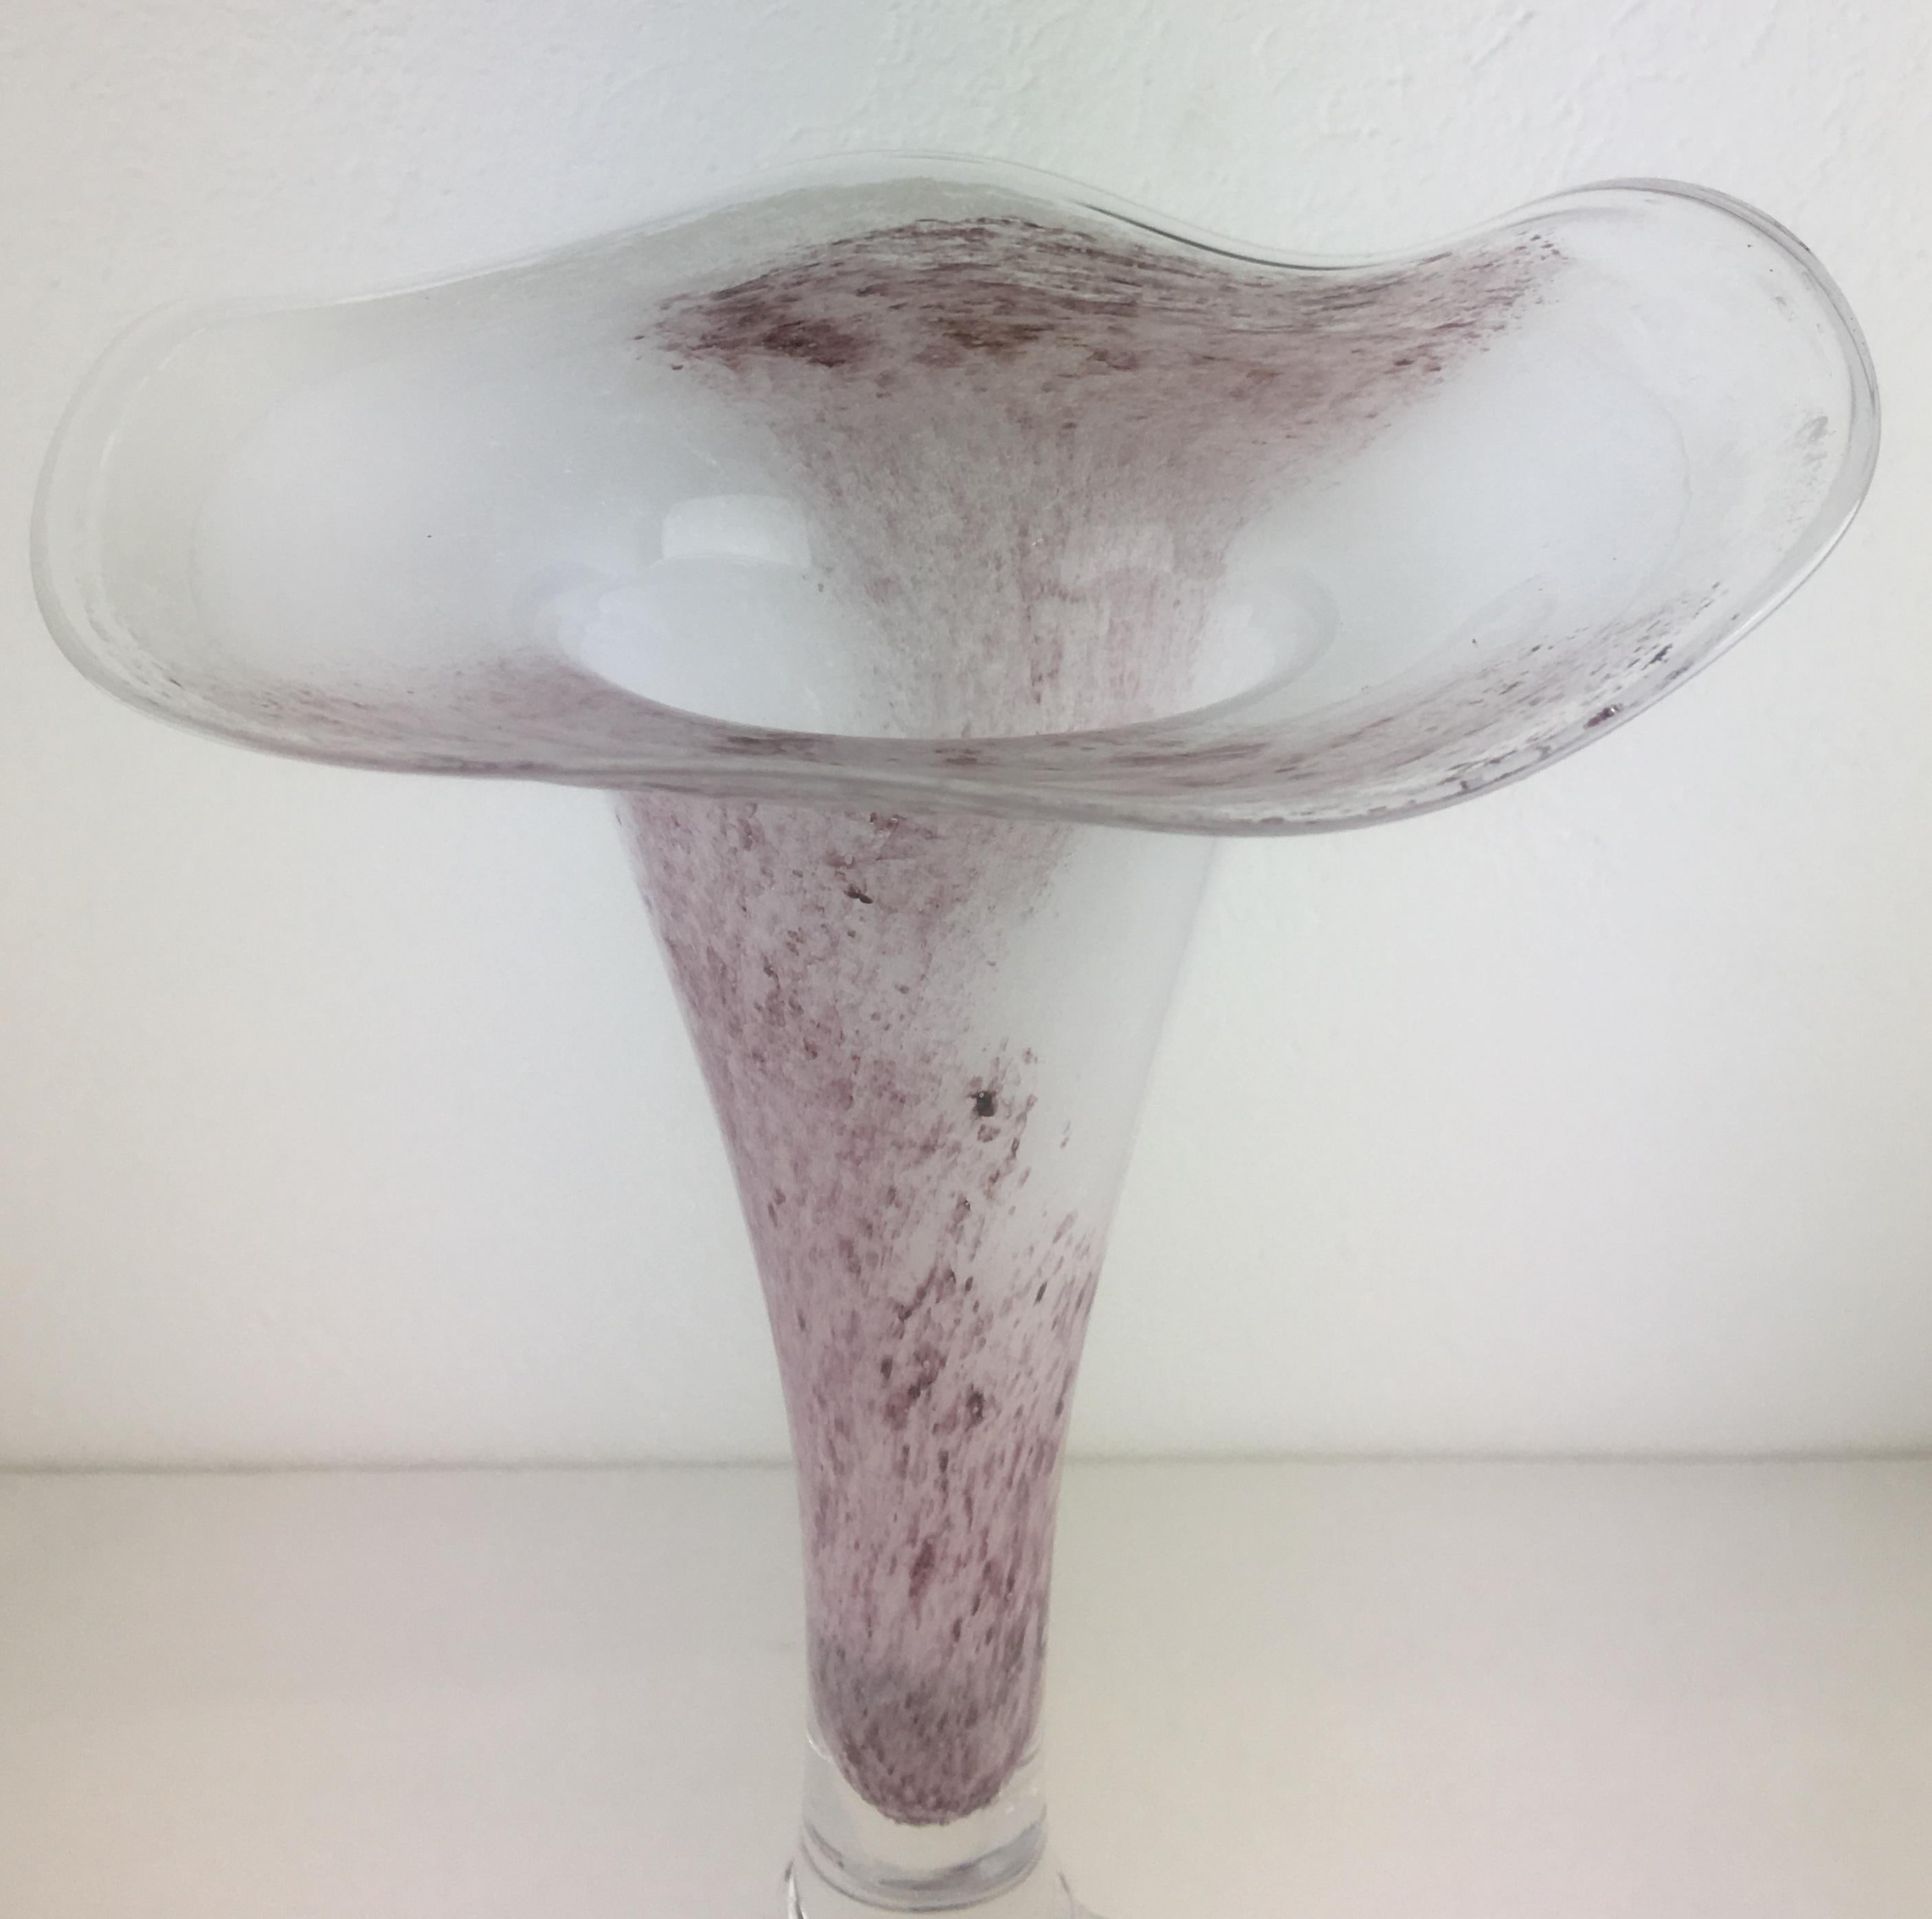 20th Century Handblown Tall Glass Centerpiece Epergne from Biot France For Sale